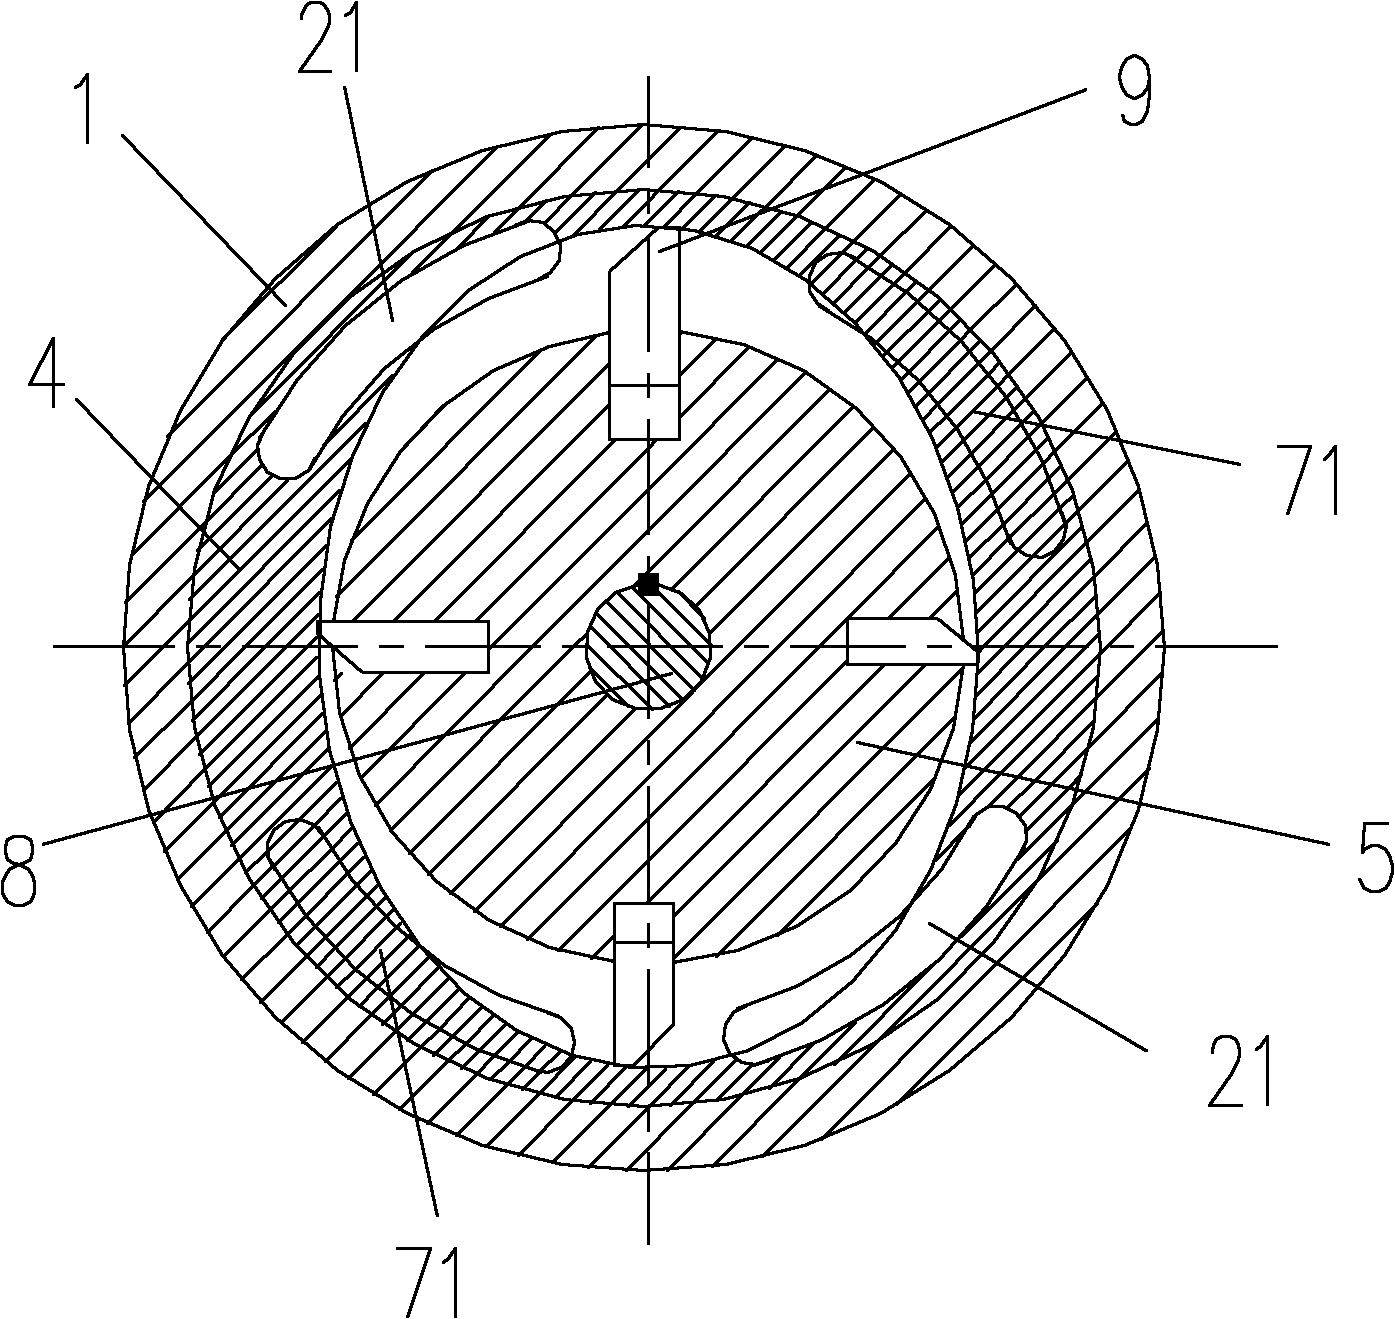 Raw oil lifting system and method for conveying fluid by utilizing sliding vane pump